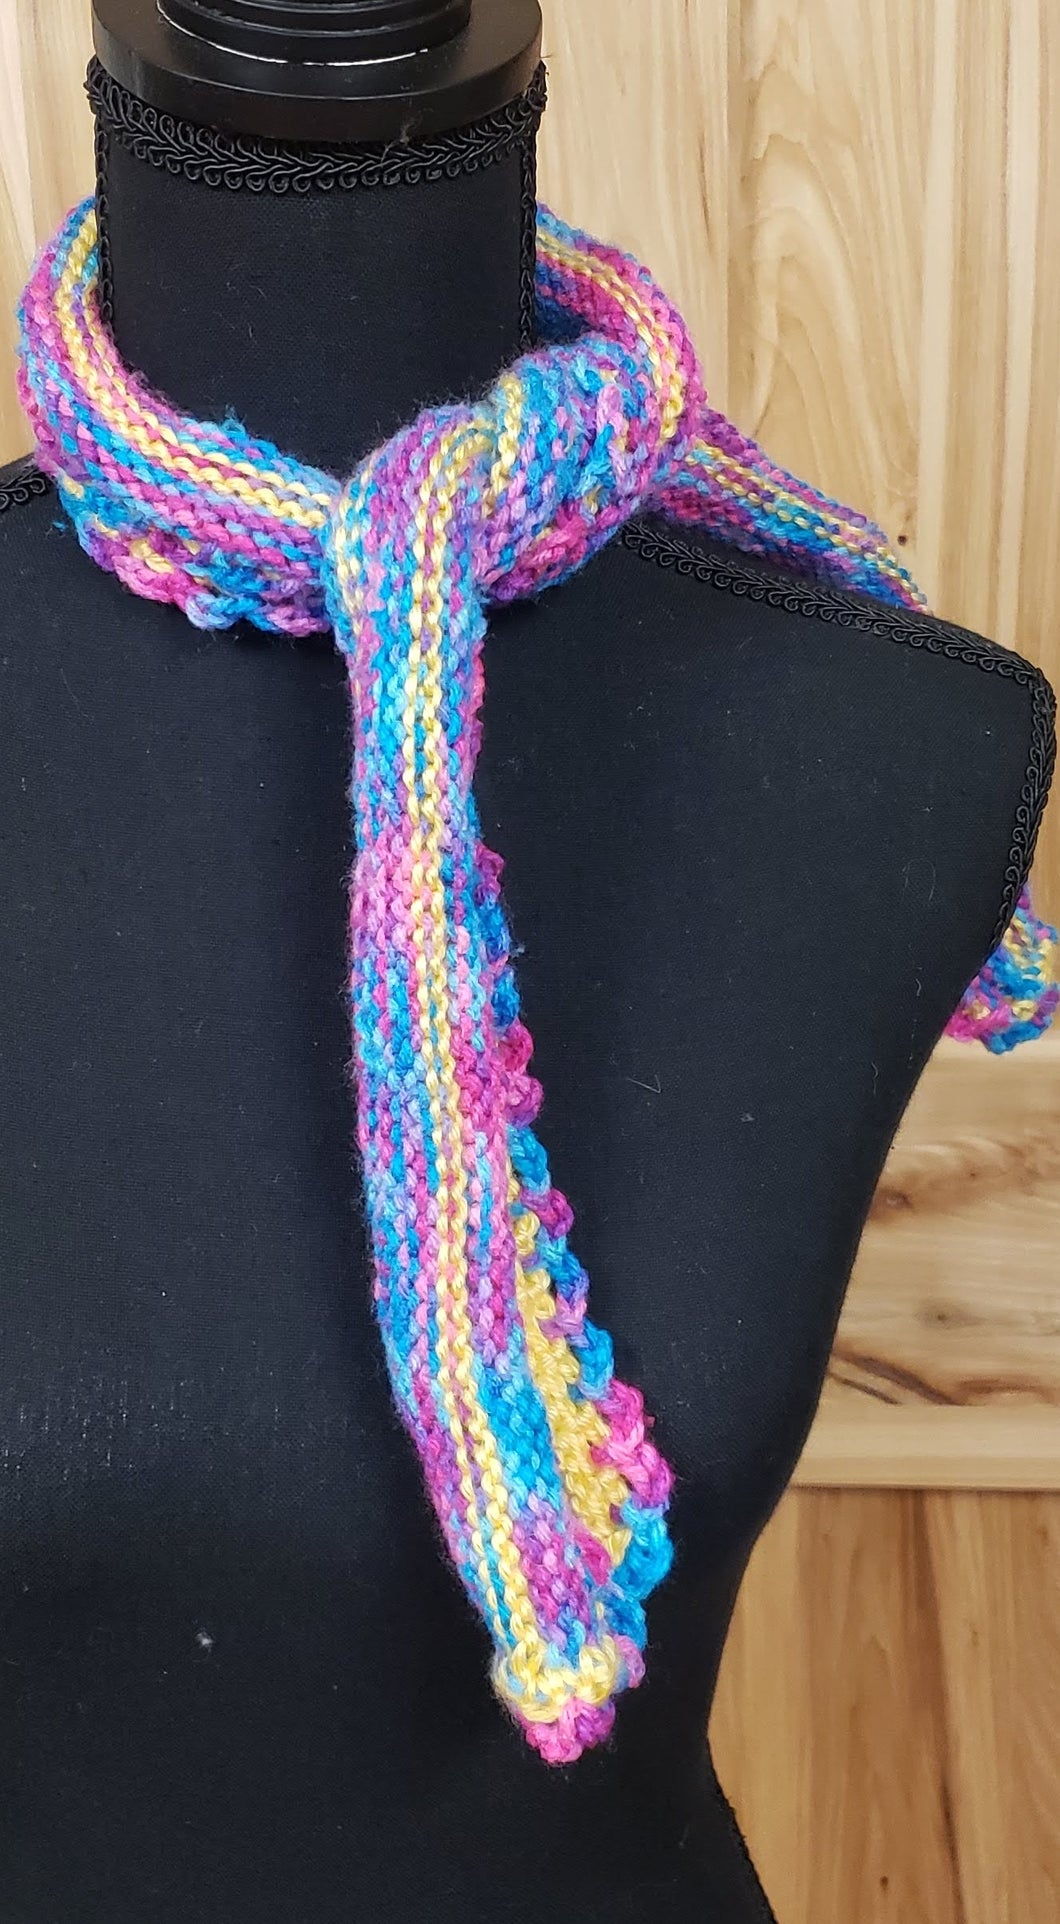 Scarf Hand Knit Pink Yellow Blue